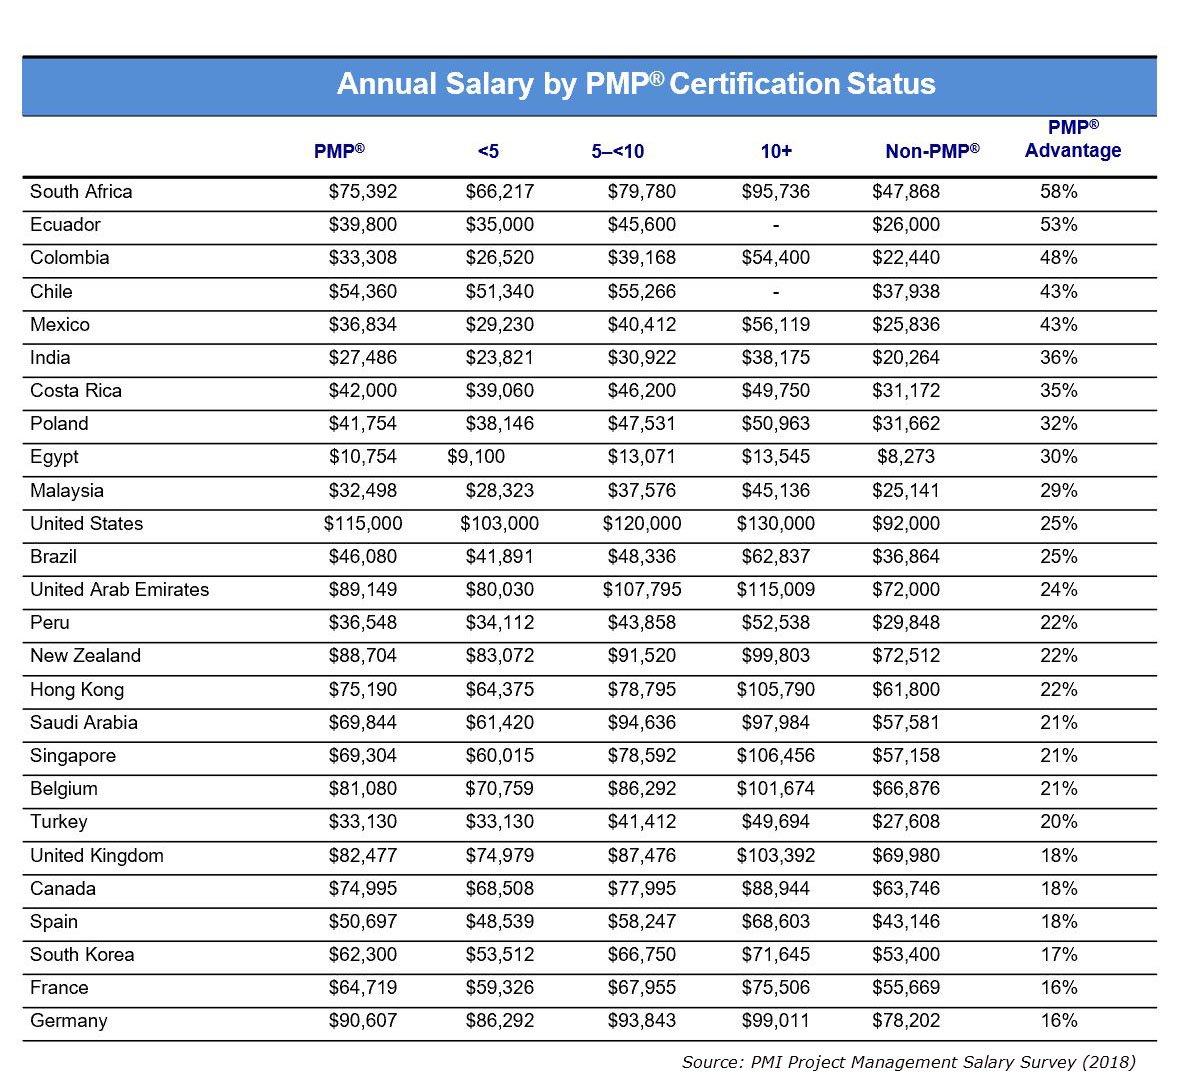 Annual Salary by PMP Status